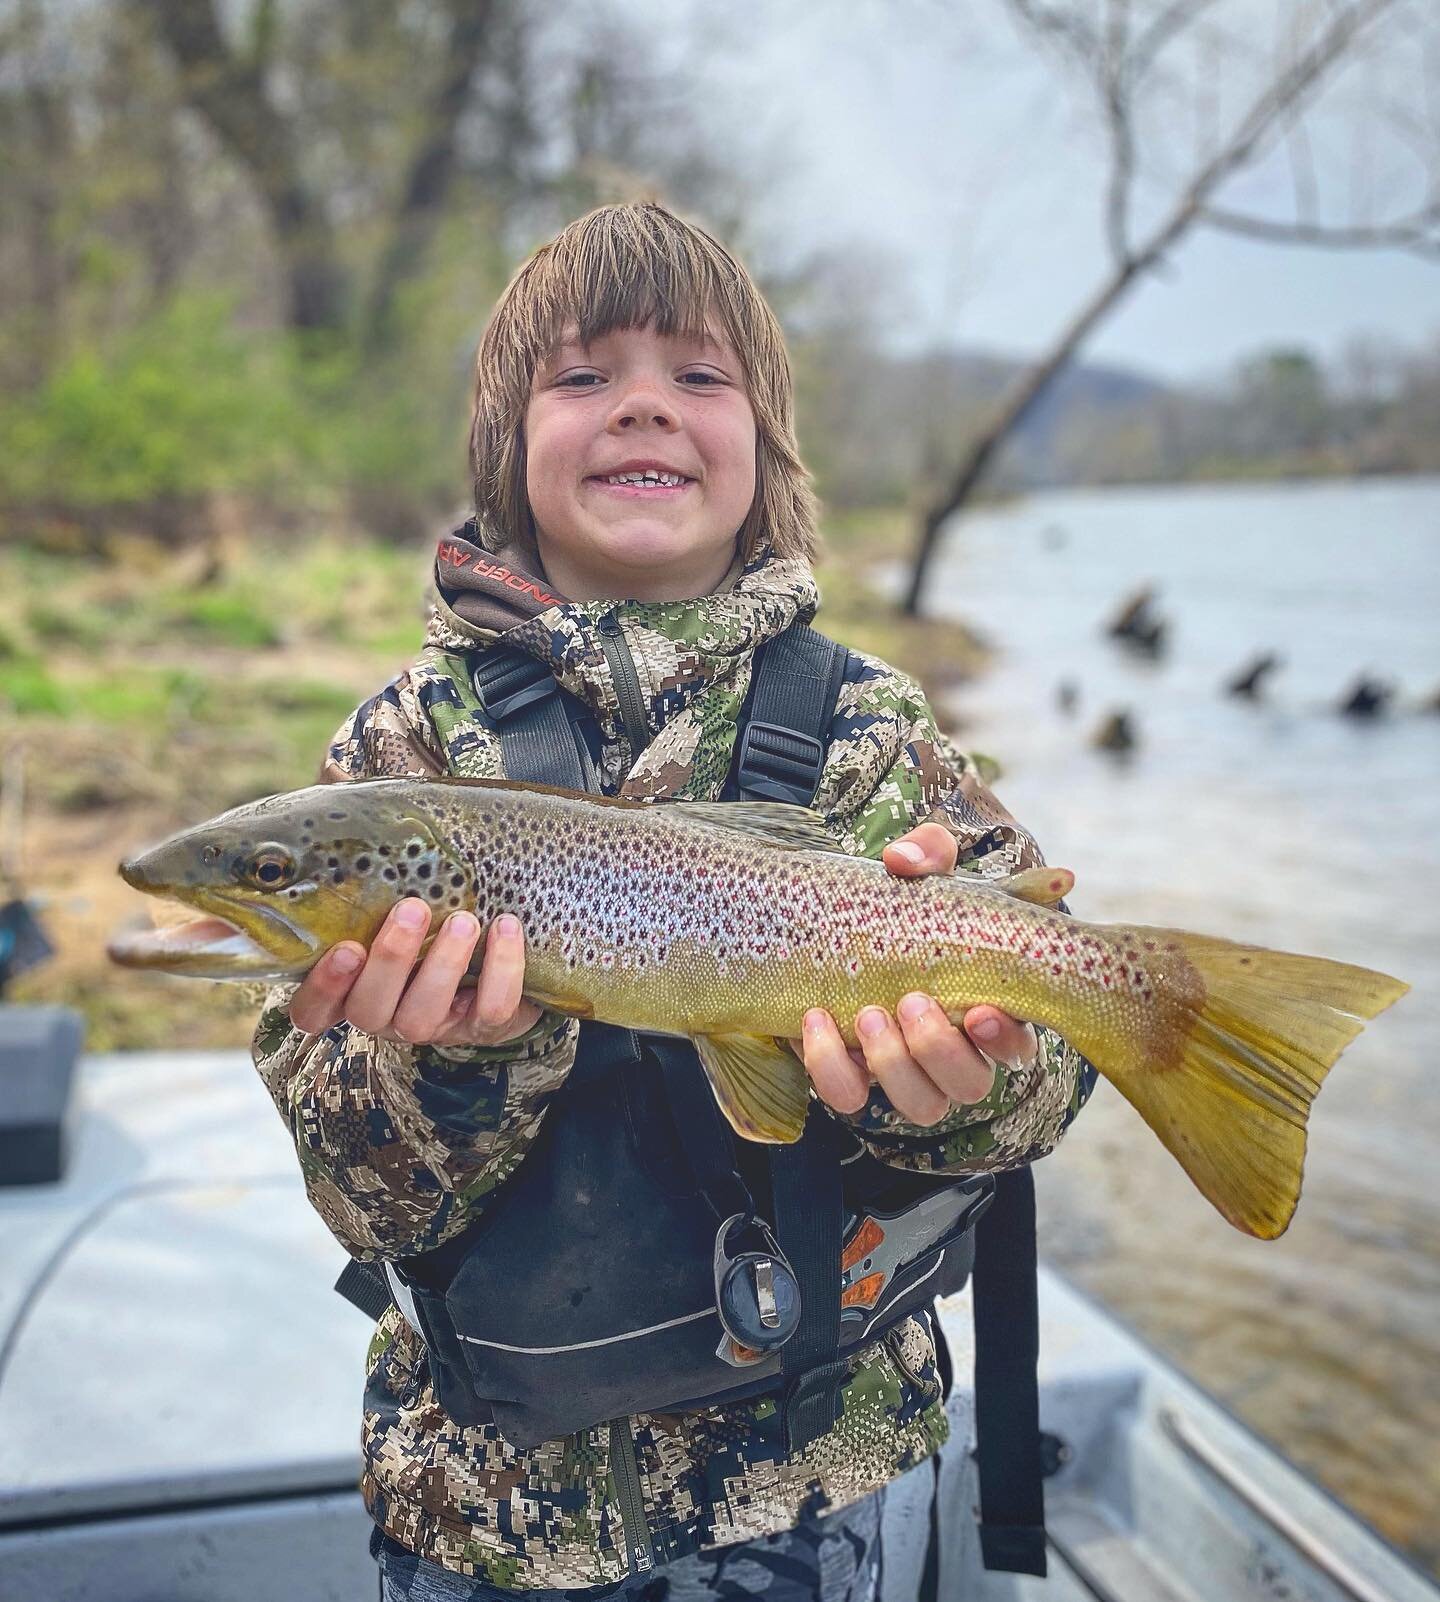 The youngest of 3 brothers put a hurtin&rsquo; on some 20s today! 
Unfortunately, his dad dropped his phone in the river on our last drift to prove that he caught a few more even bigger ones! Well done for an 8 year old.... anyone for that matter!
&b